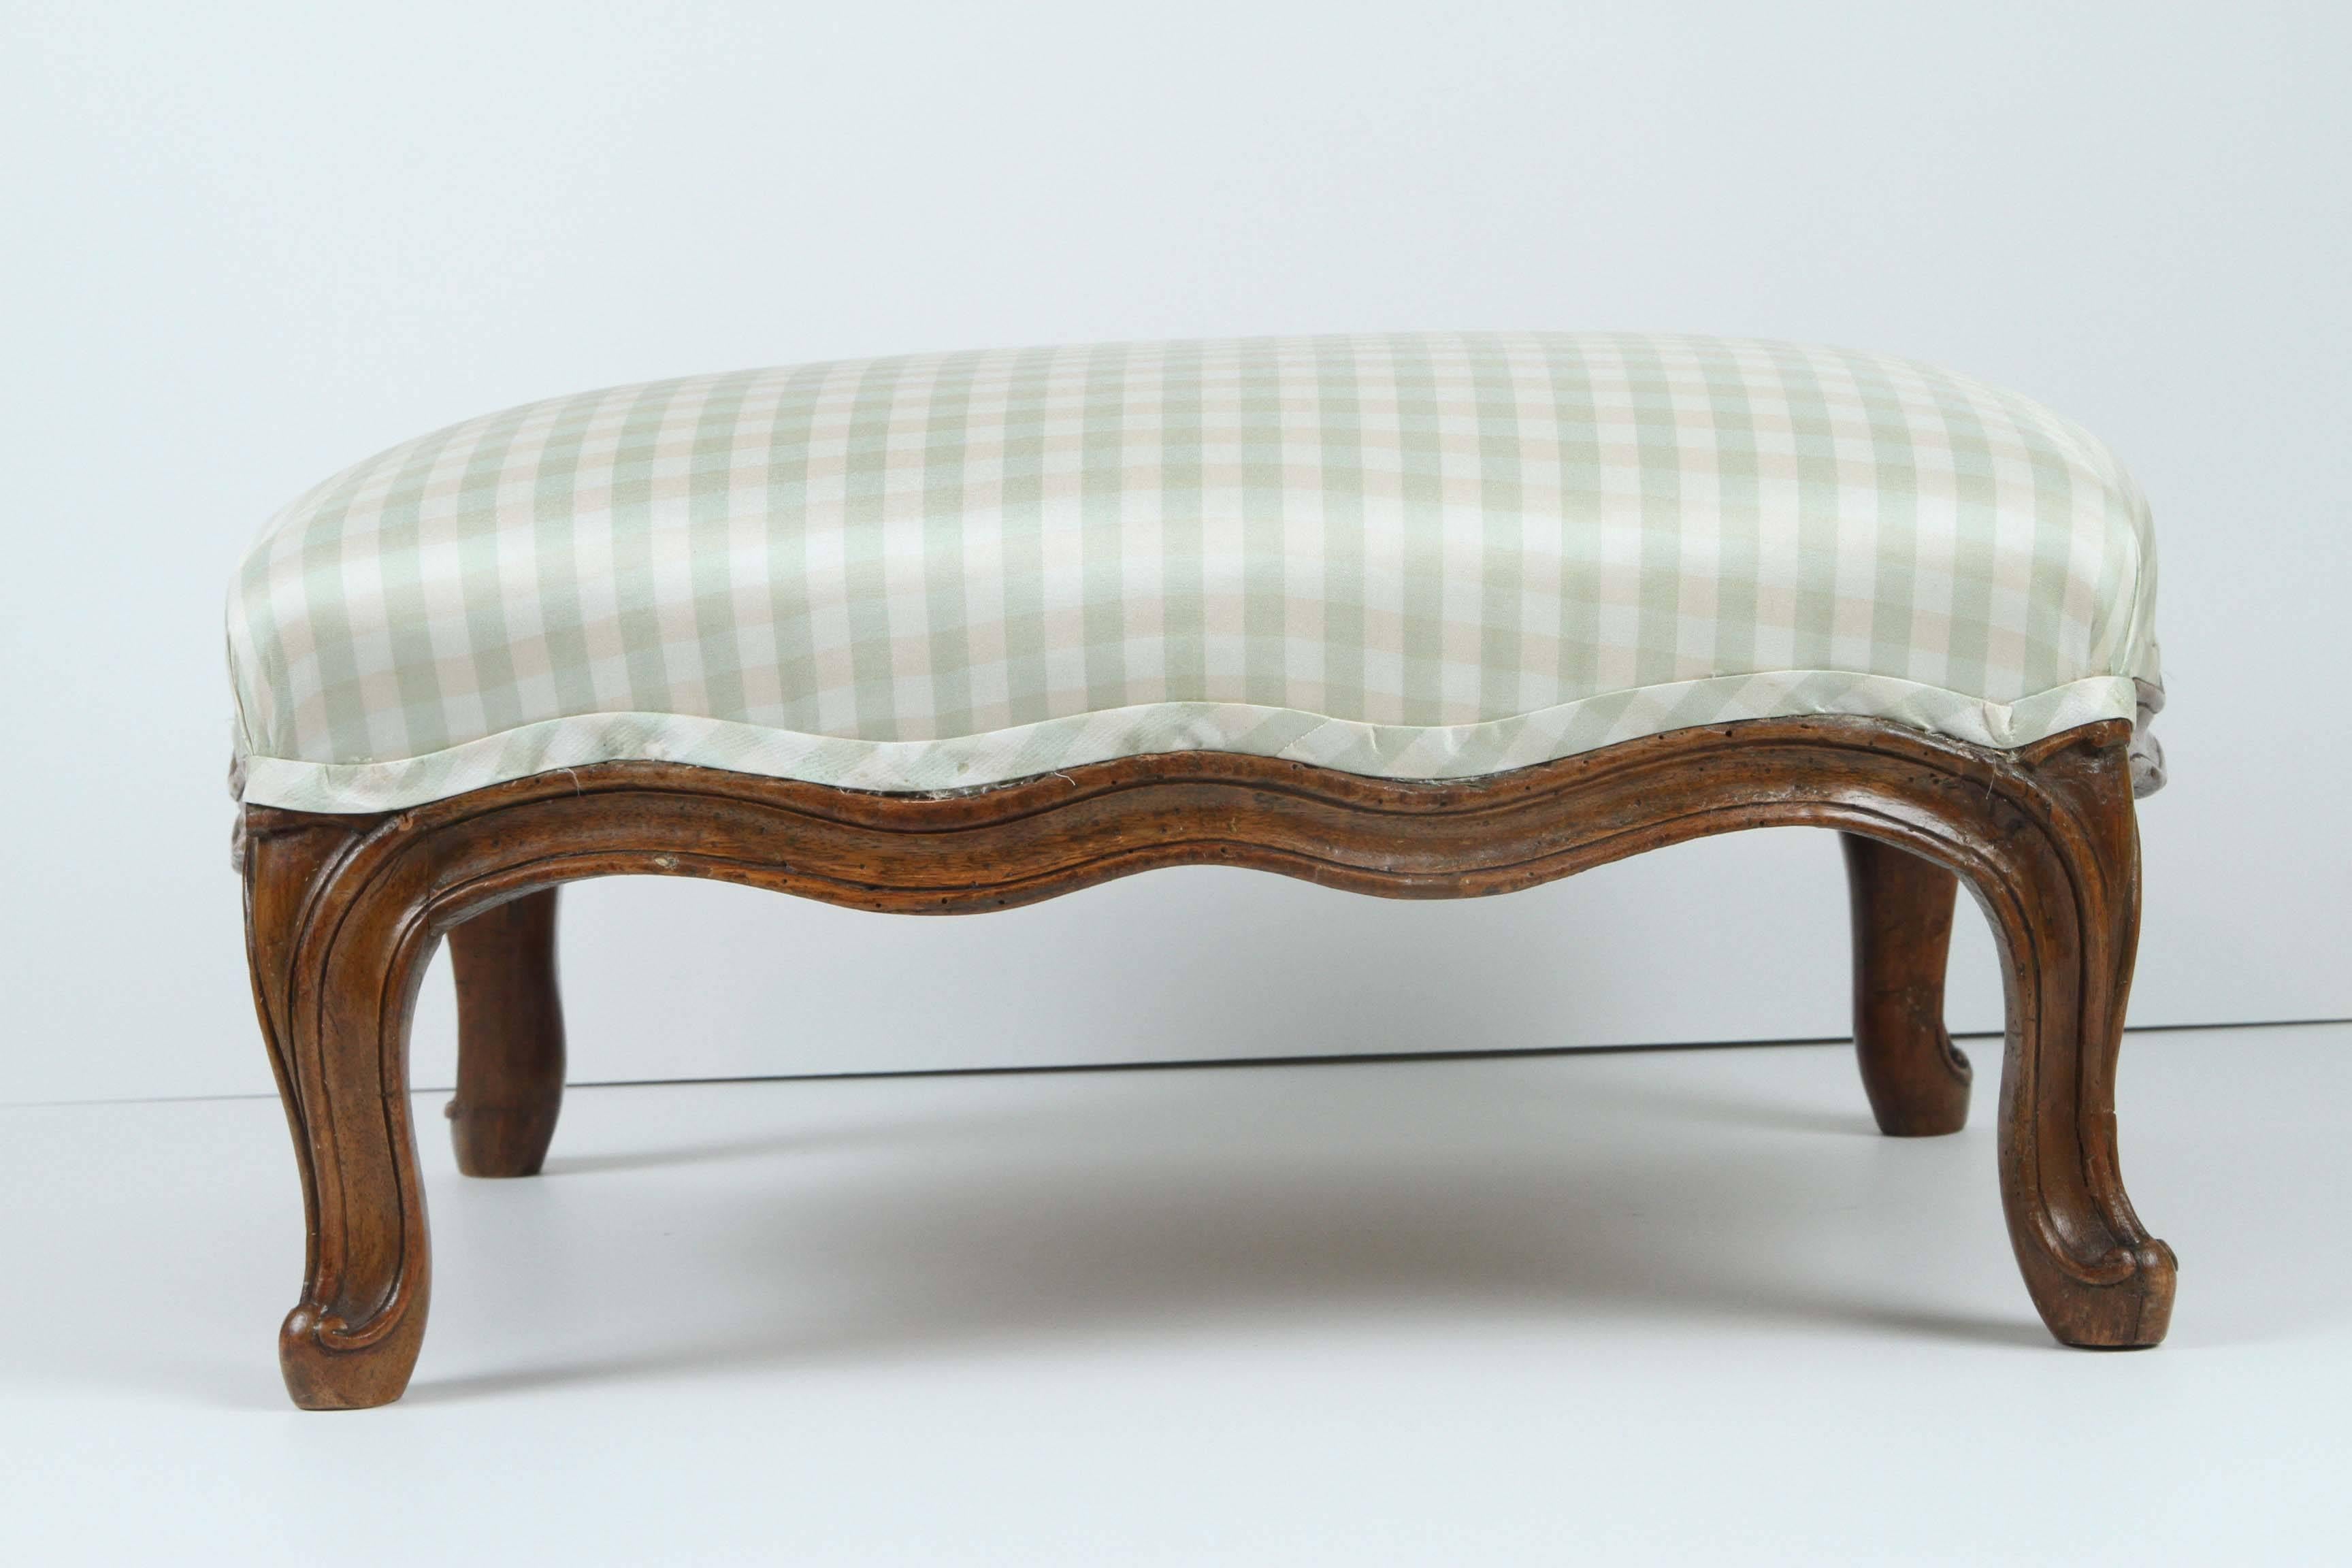 A French Louis XV footstool in beechwood with distinctive Rococo curves and carving.